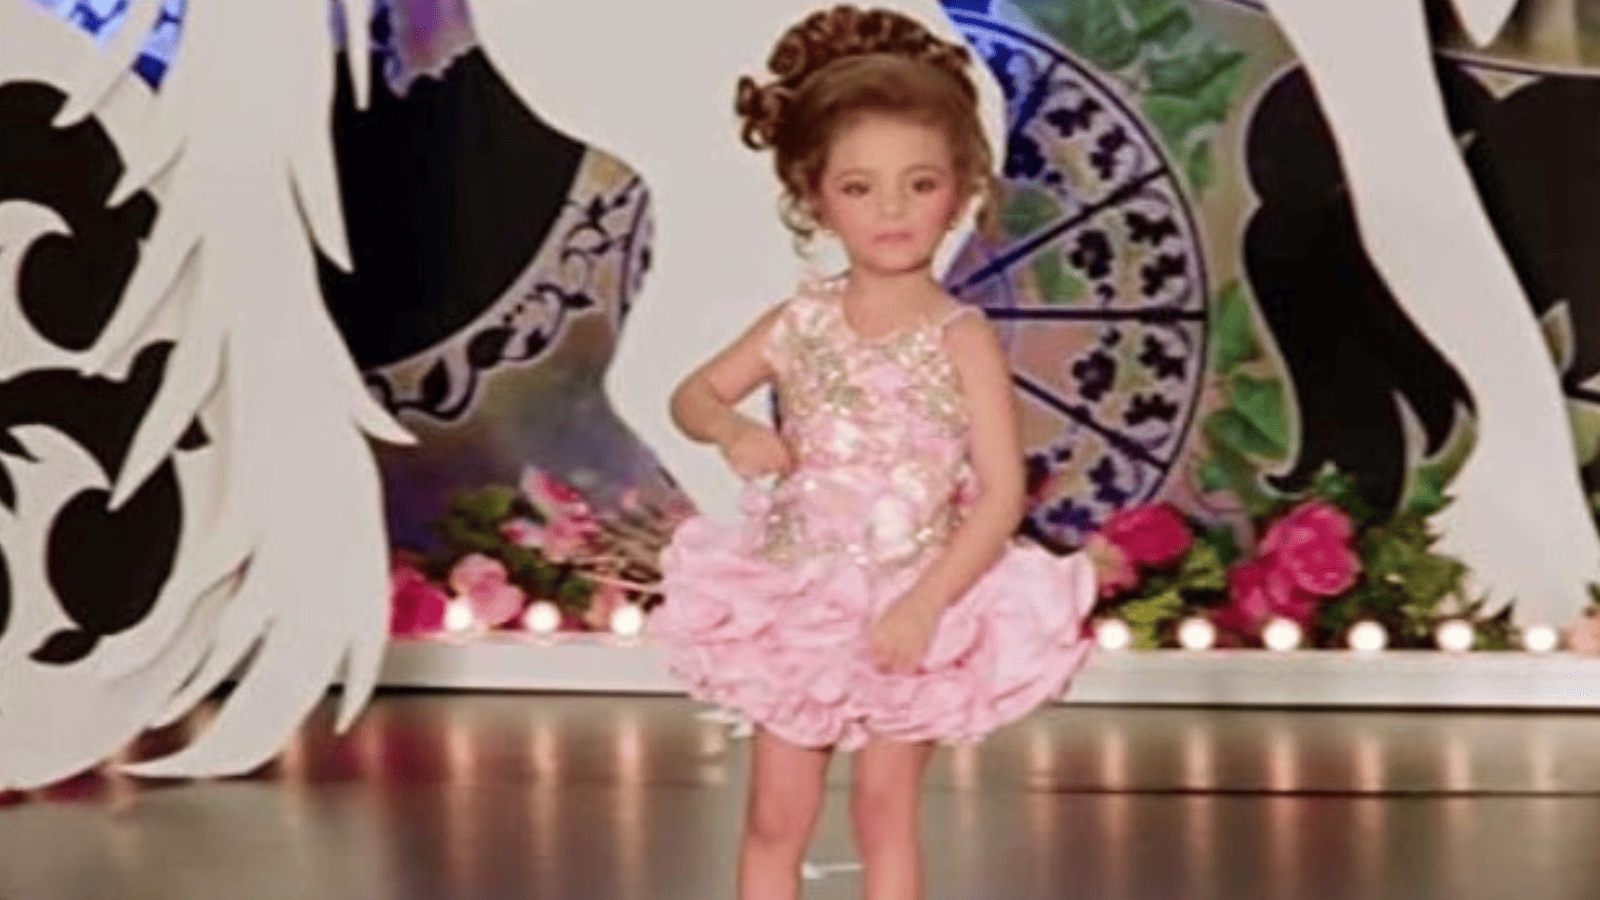 Scene from Toddlers and Tiaras